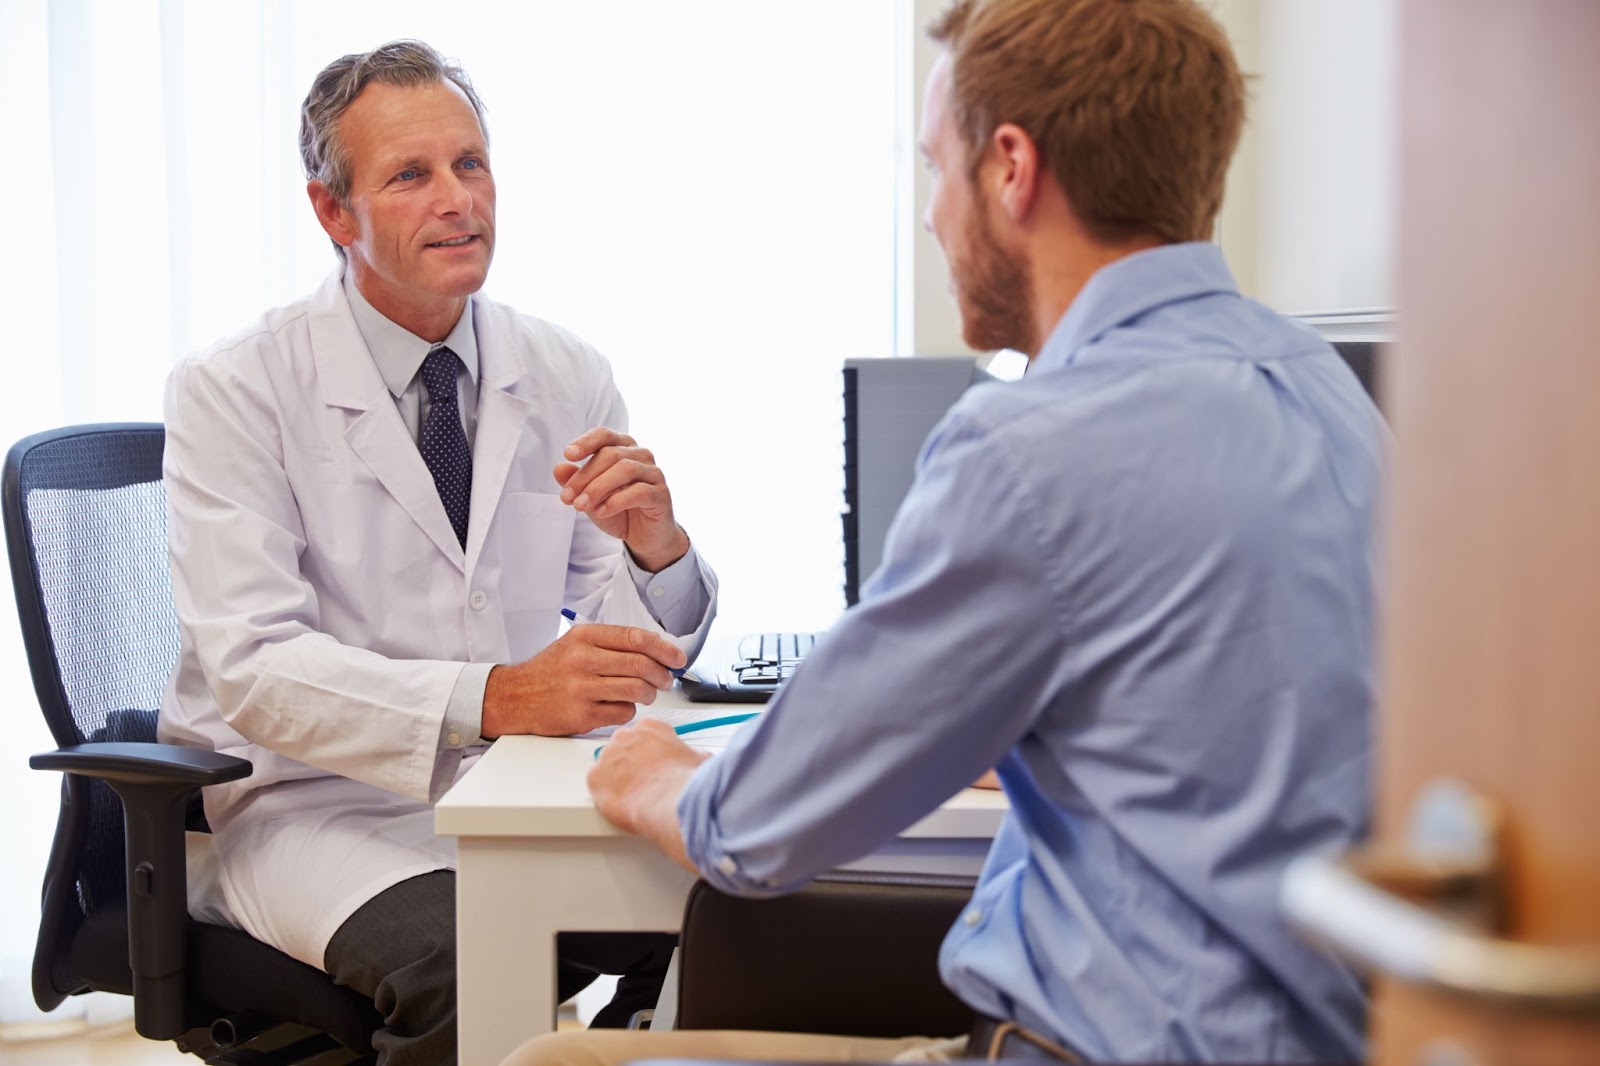 Man discussing with doctor how often he should get a prostate exam.